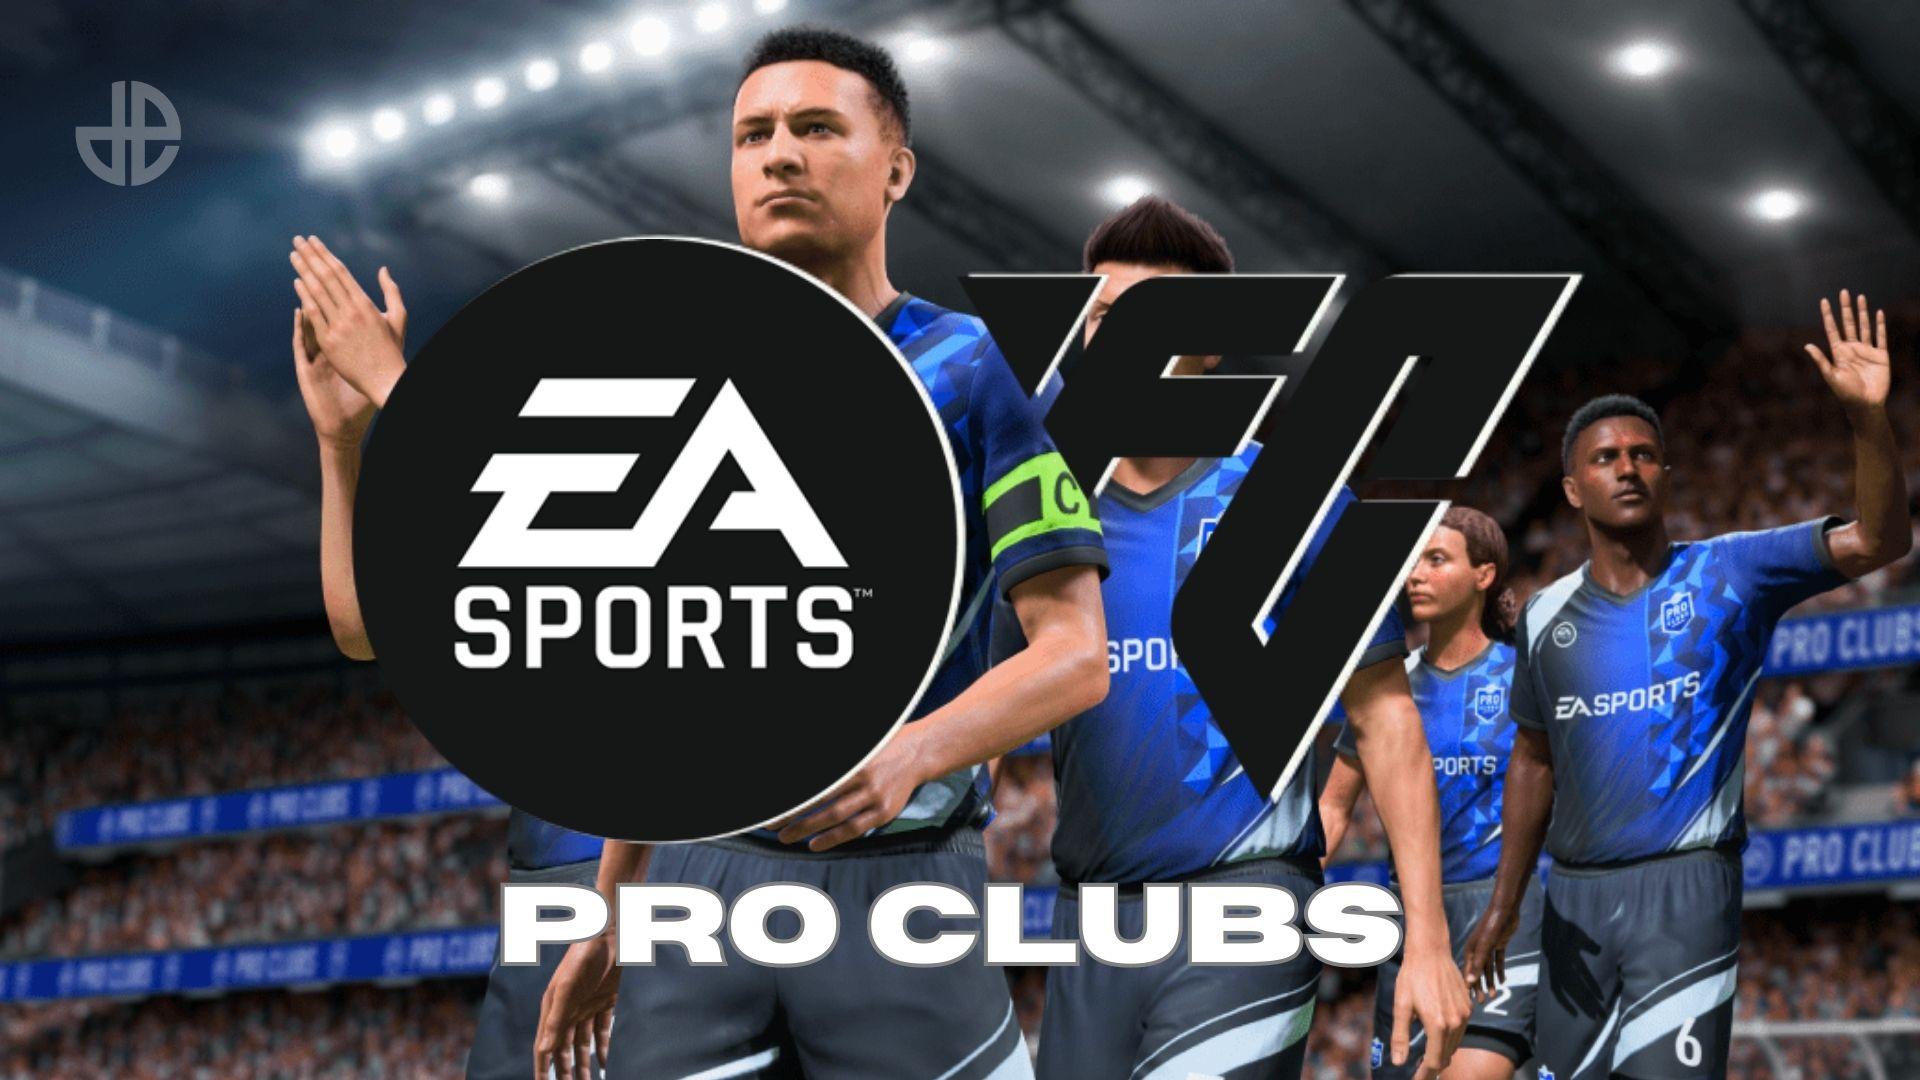 FIFA players in Blue kit with EA SPORTS FC logo and Pro Clubs text